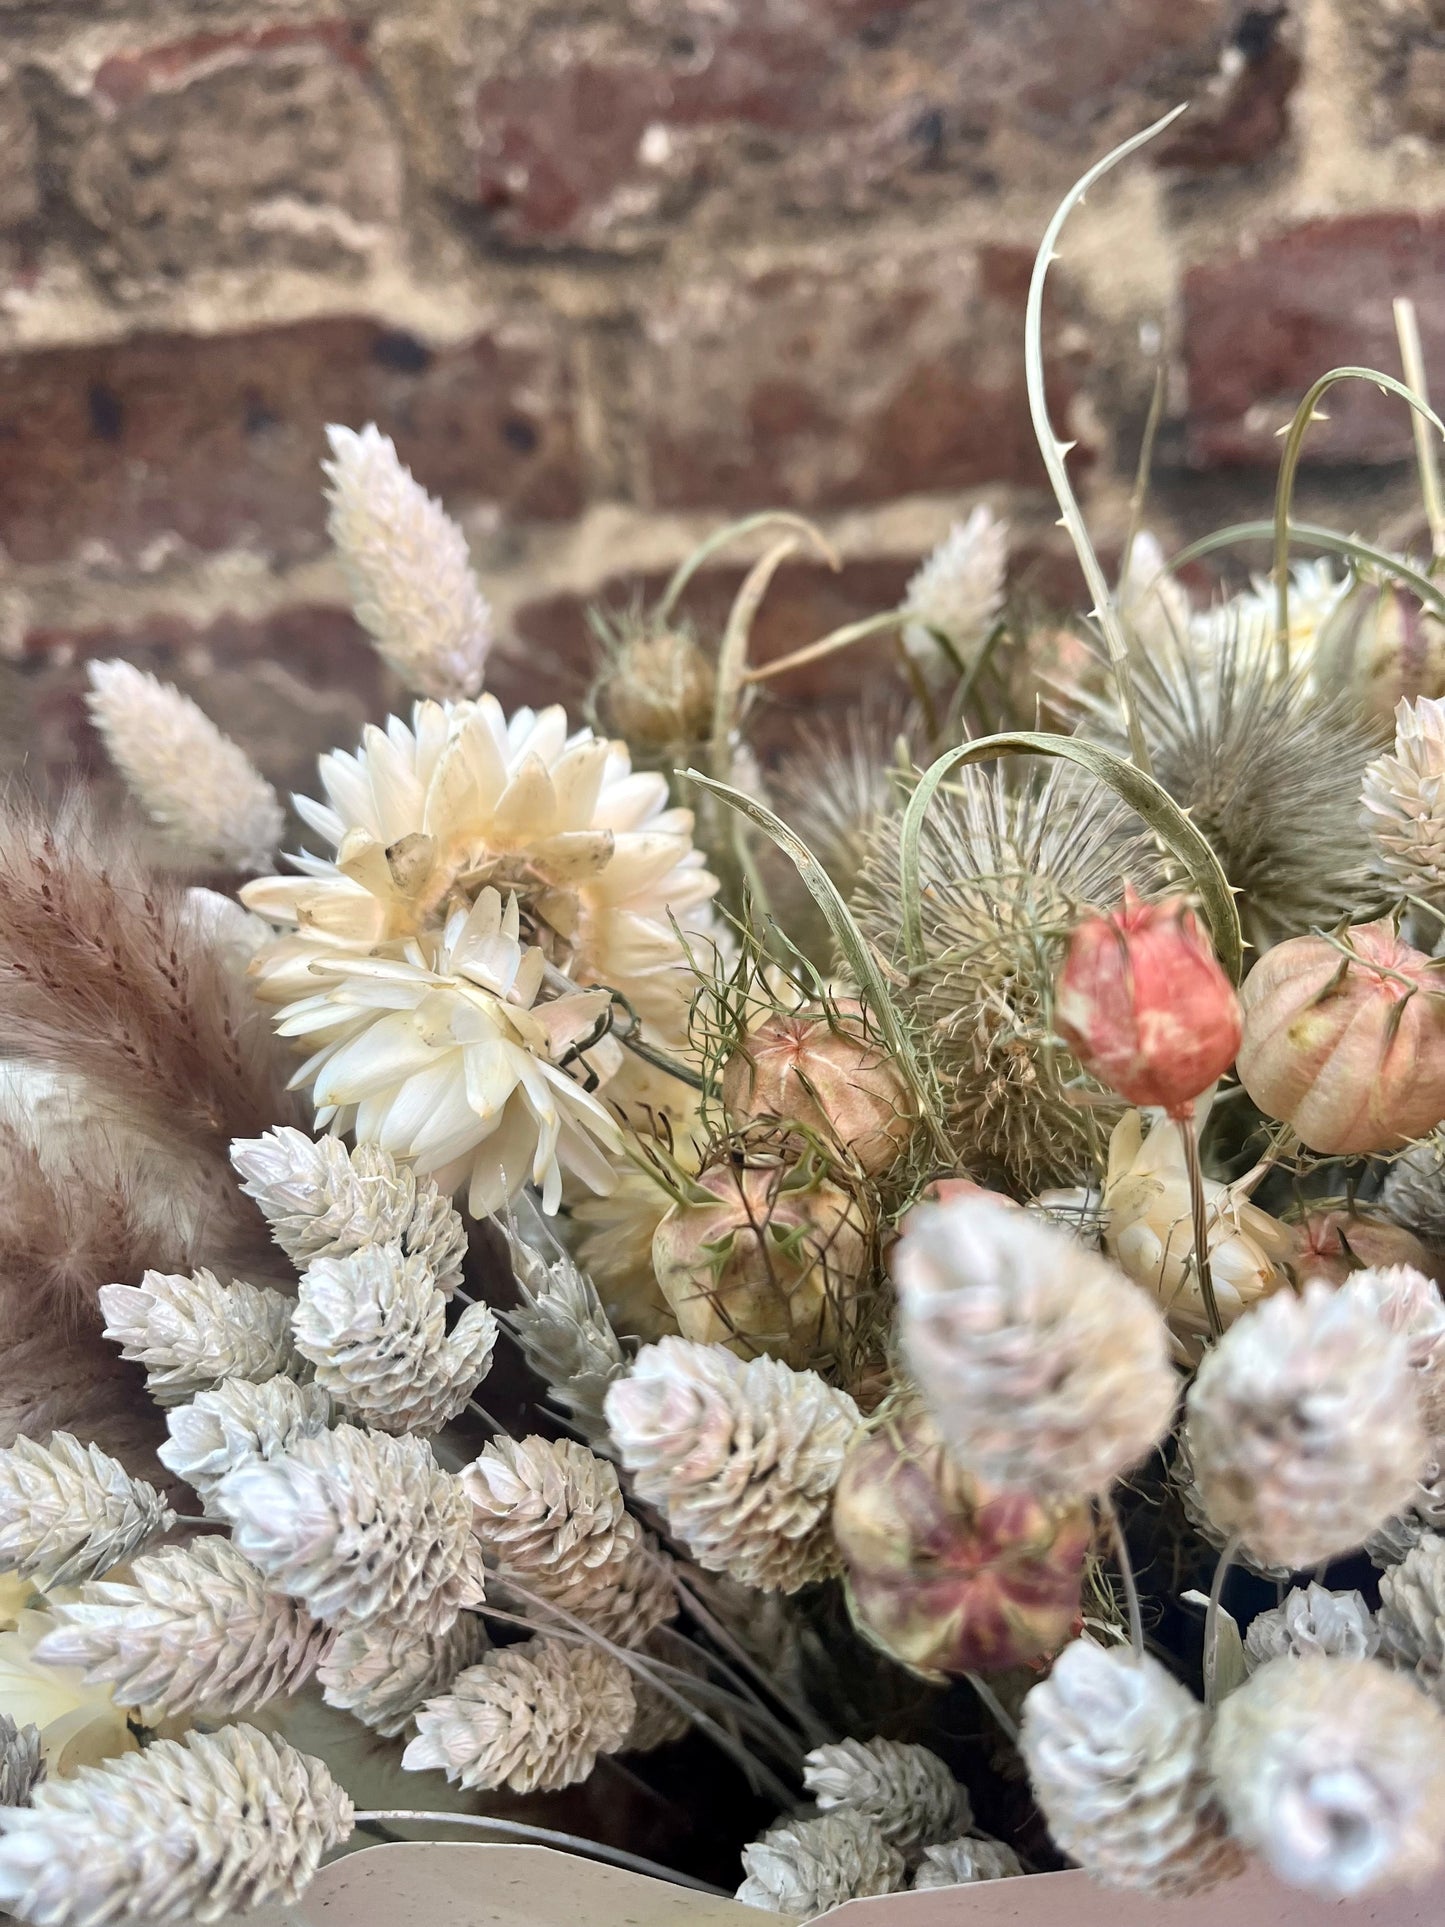 Dried flower bunch - Natural